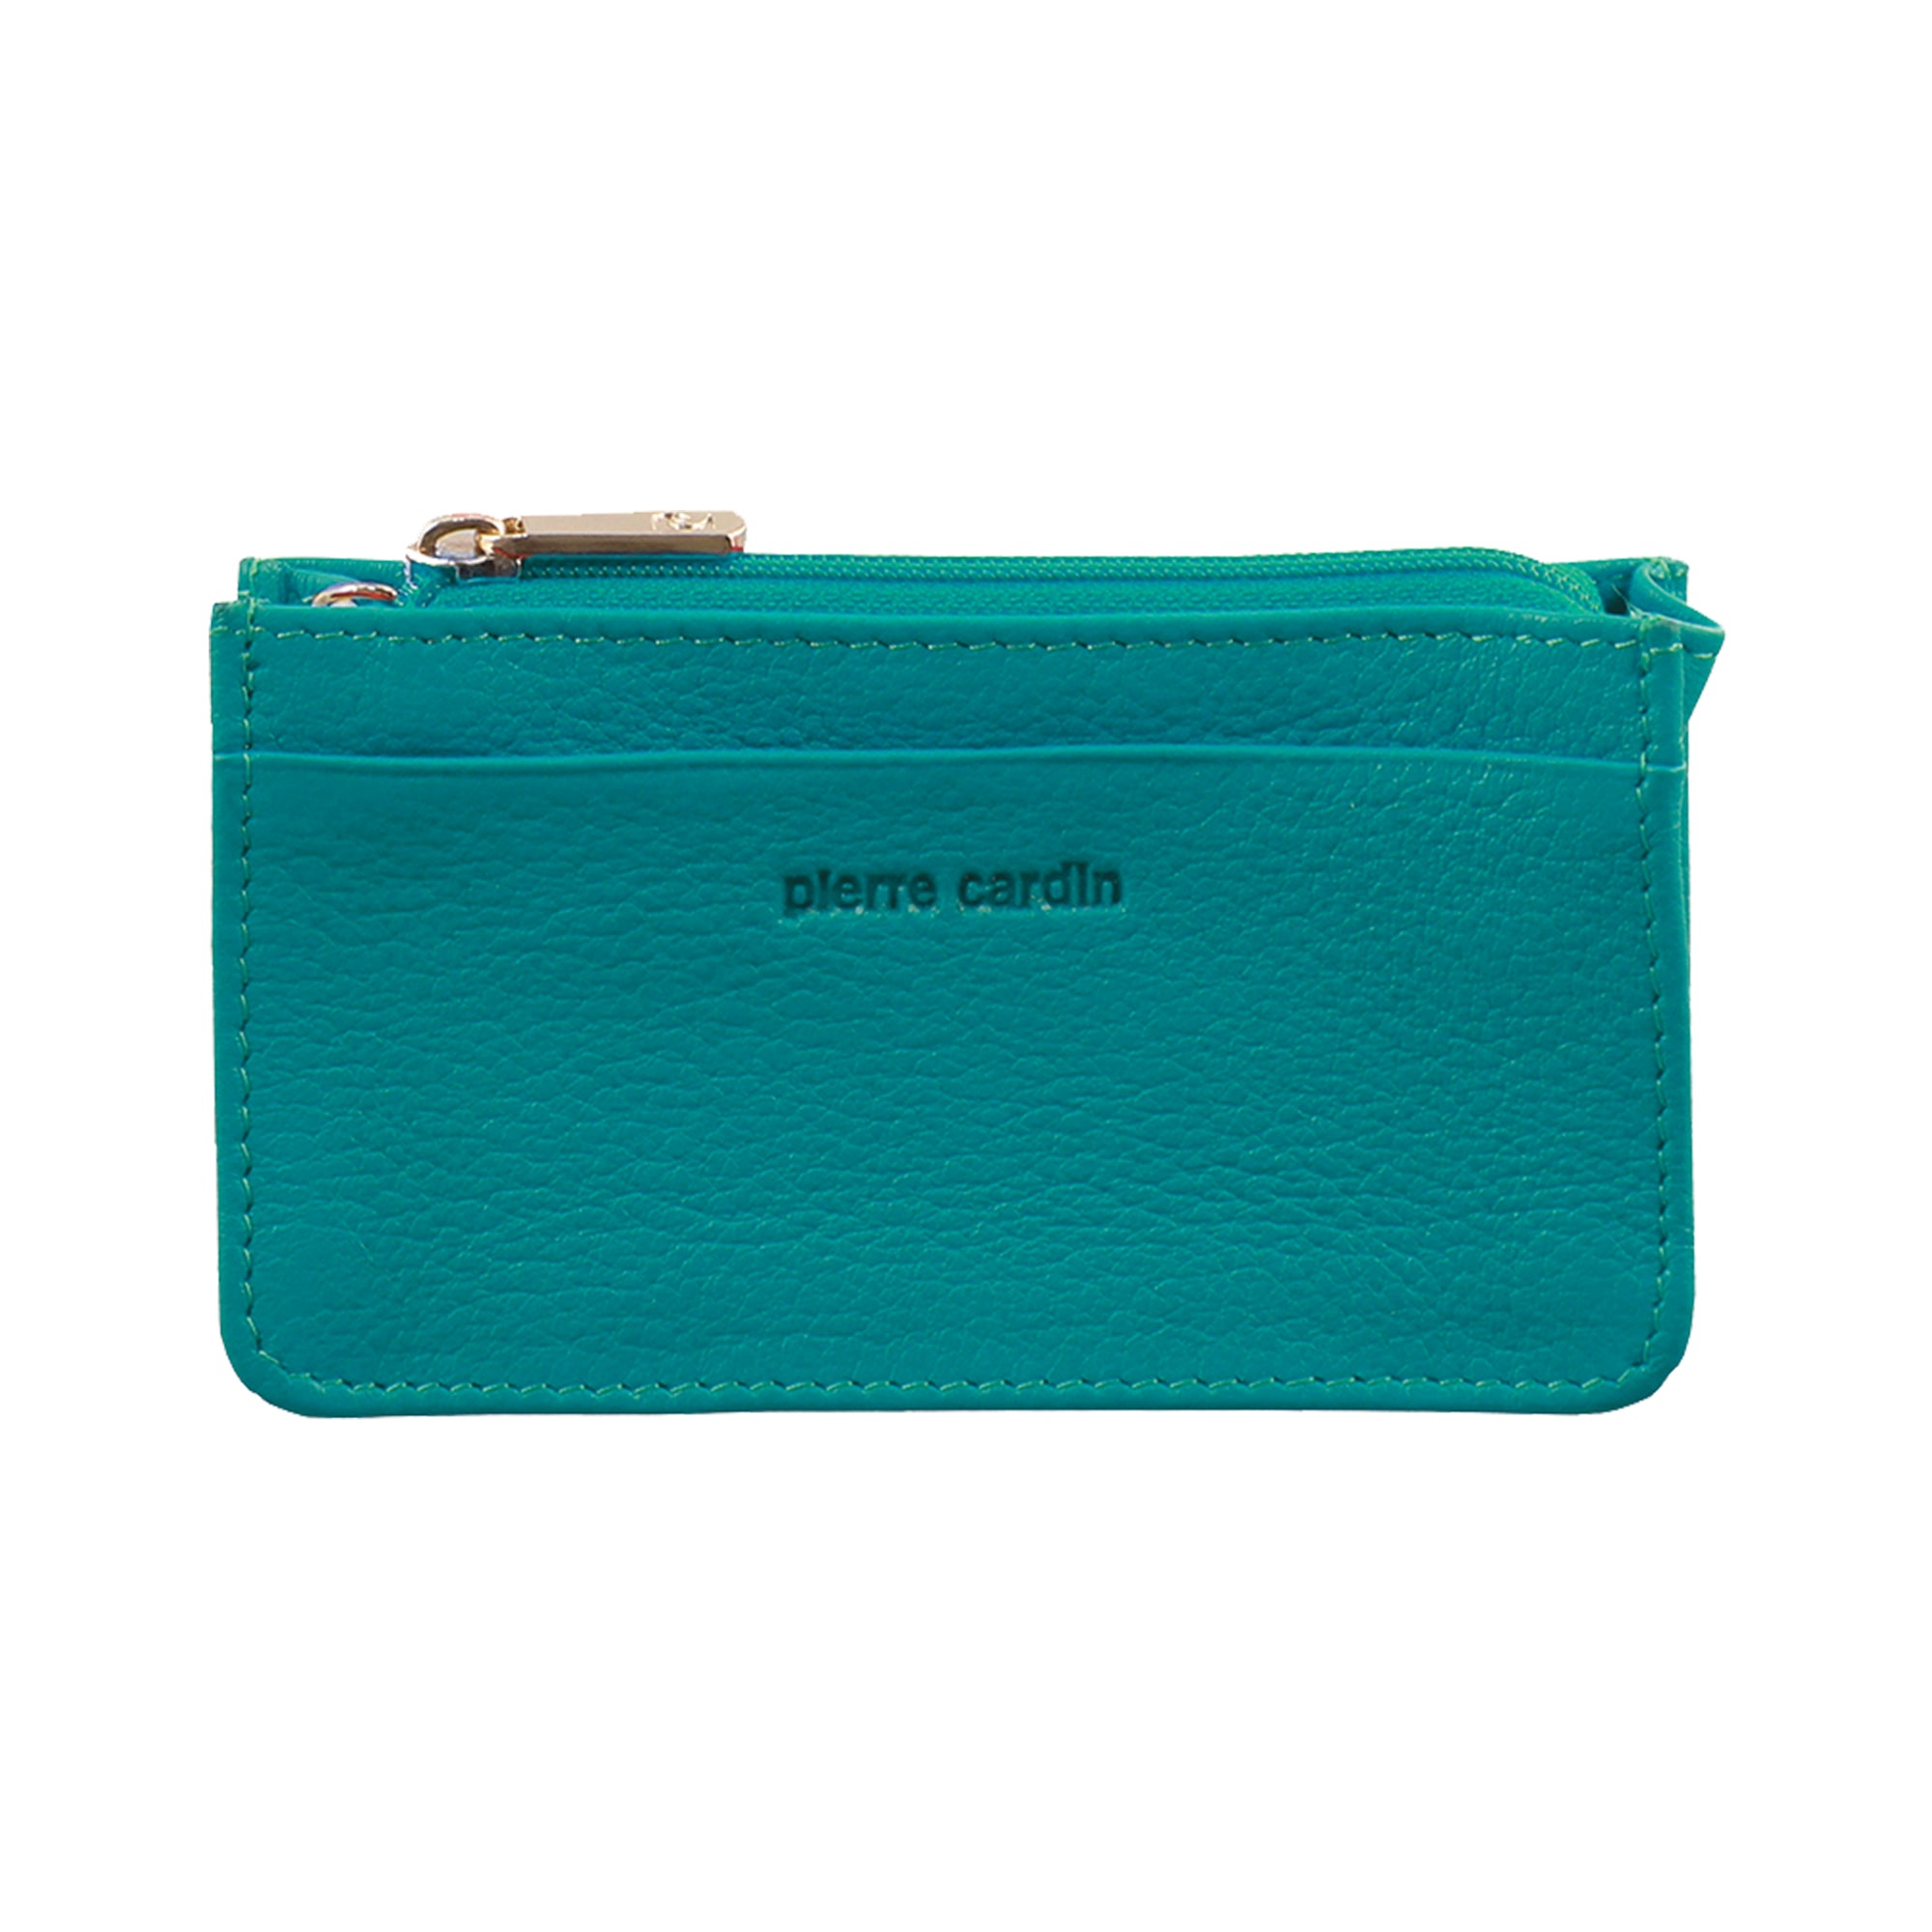 Pierre Cardin Coin Purse with Keyring in Turquoise